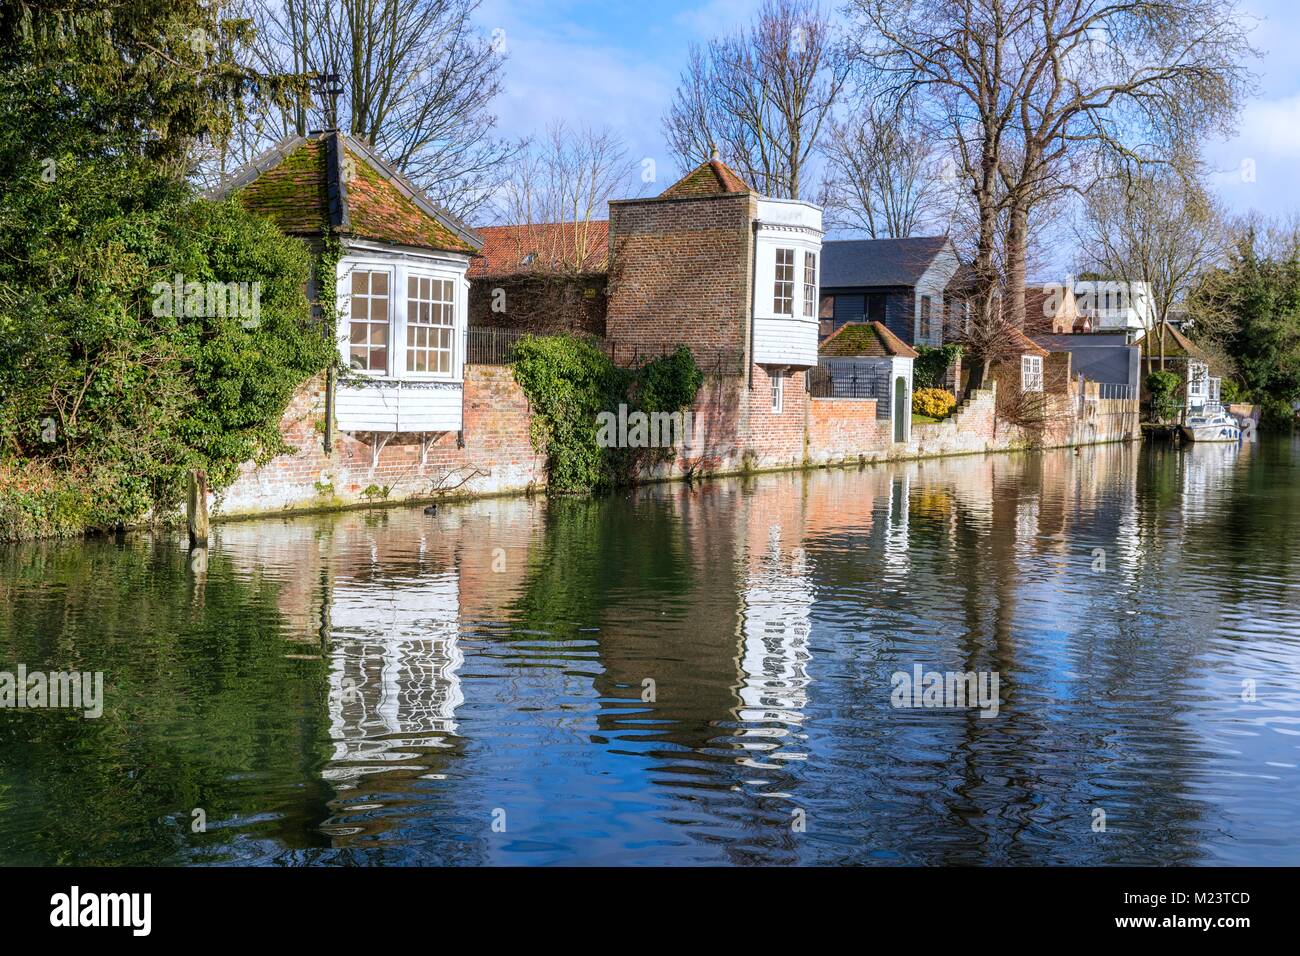 Gazebos by the River Lea in Ware, Hertfordshire Stock Photo